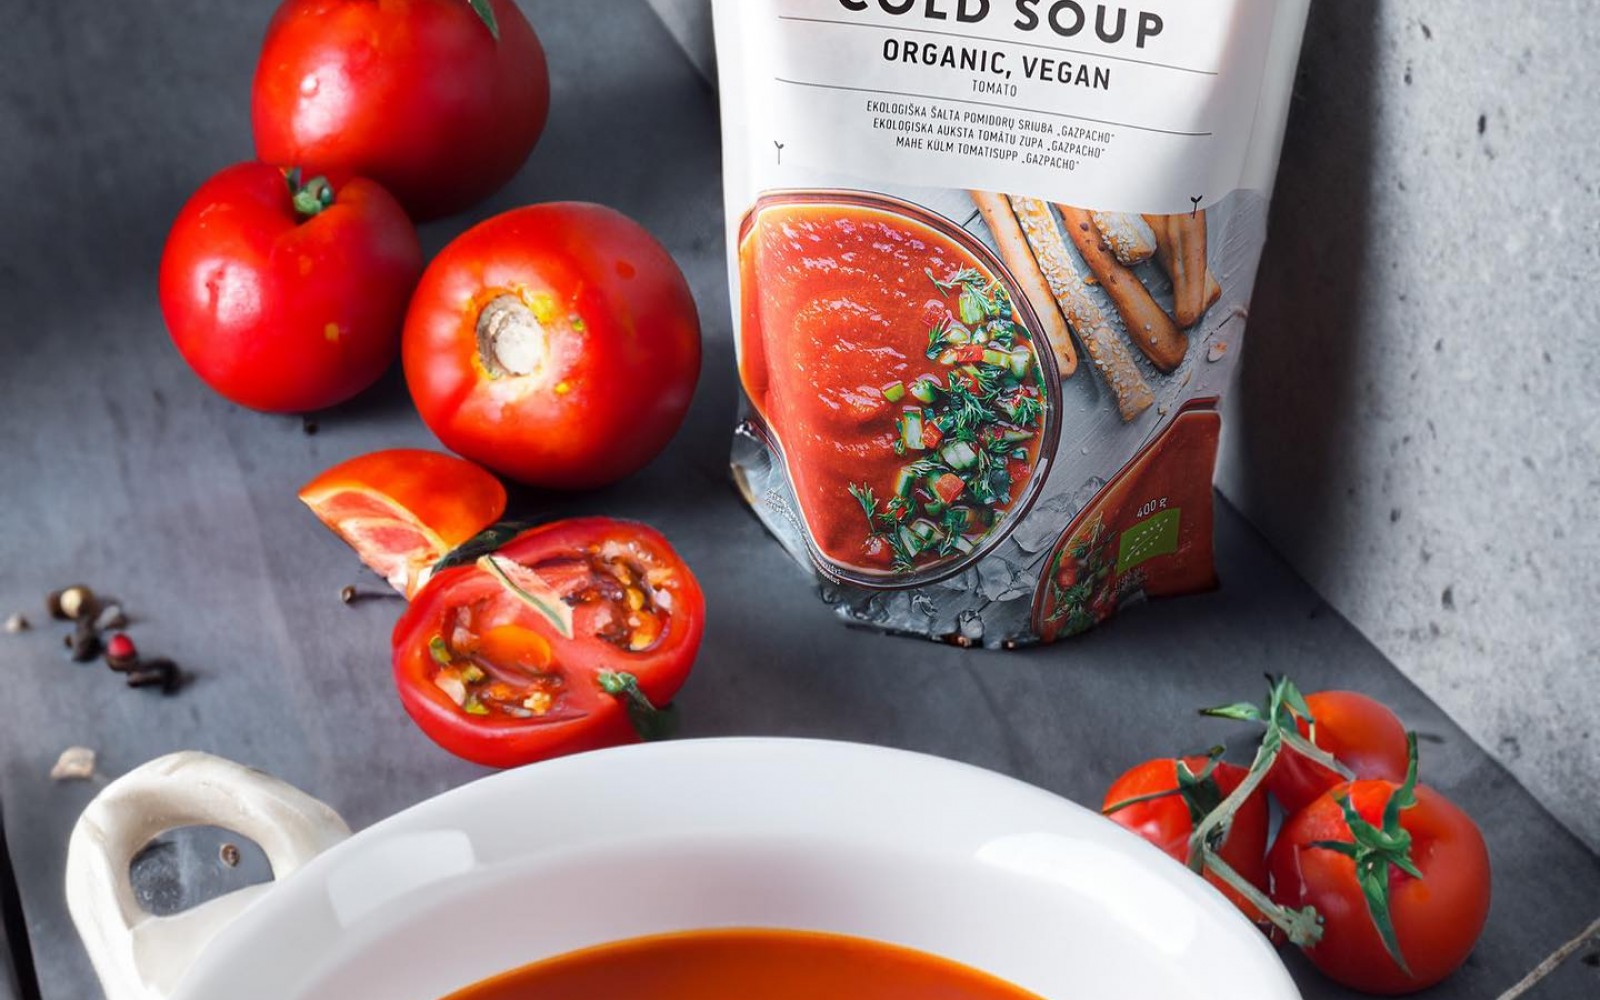 Refresh yourself in this hot weather with an organic gazpacho soup